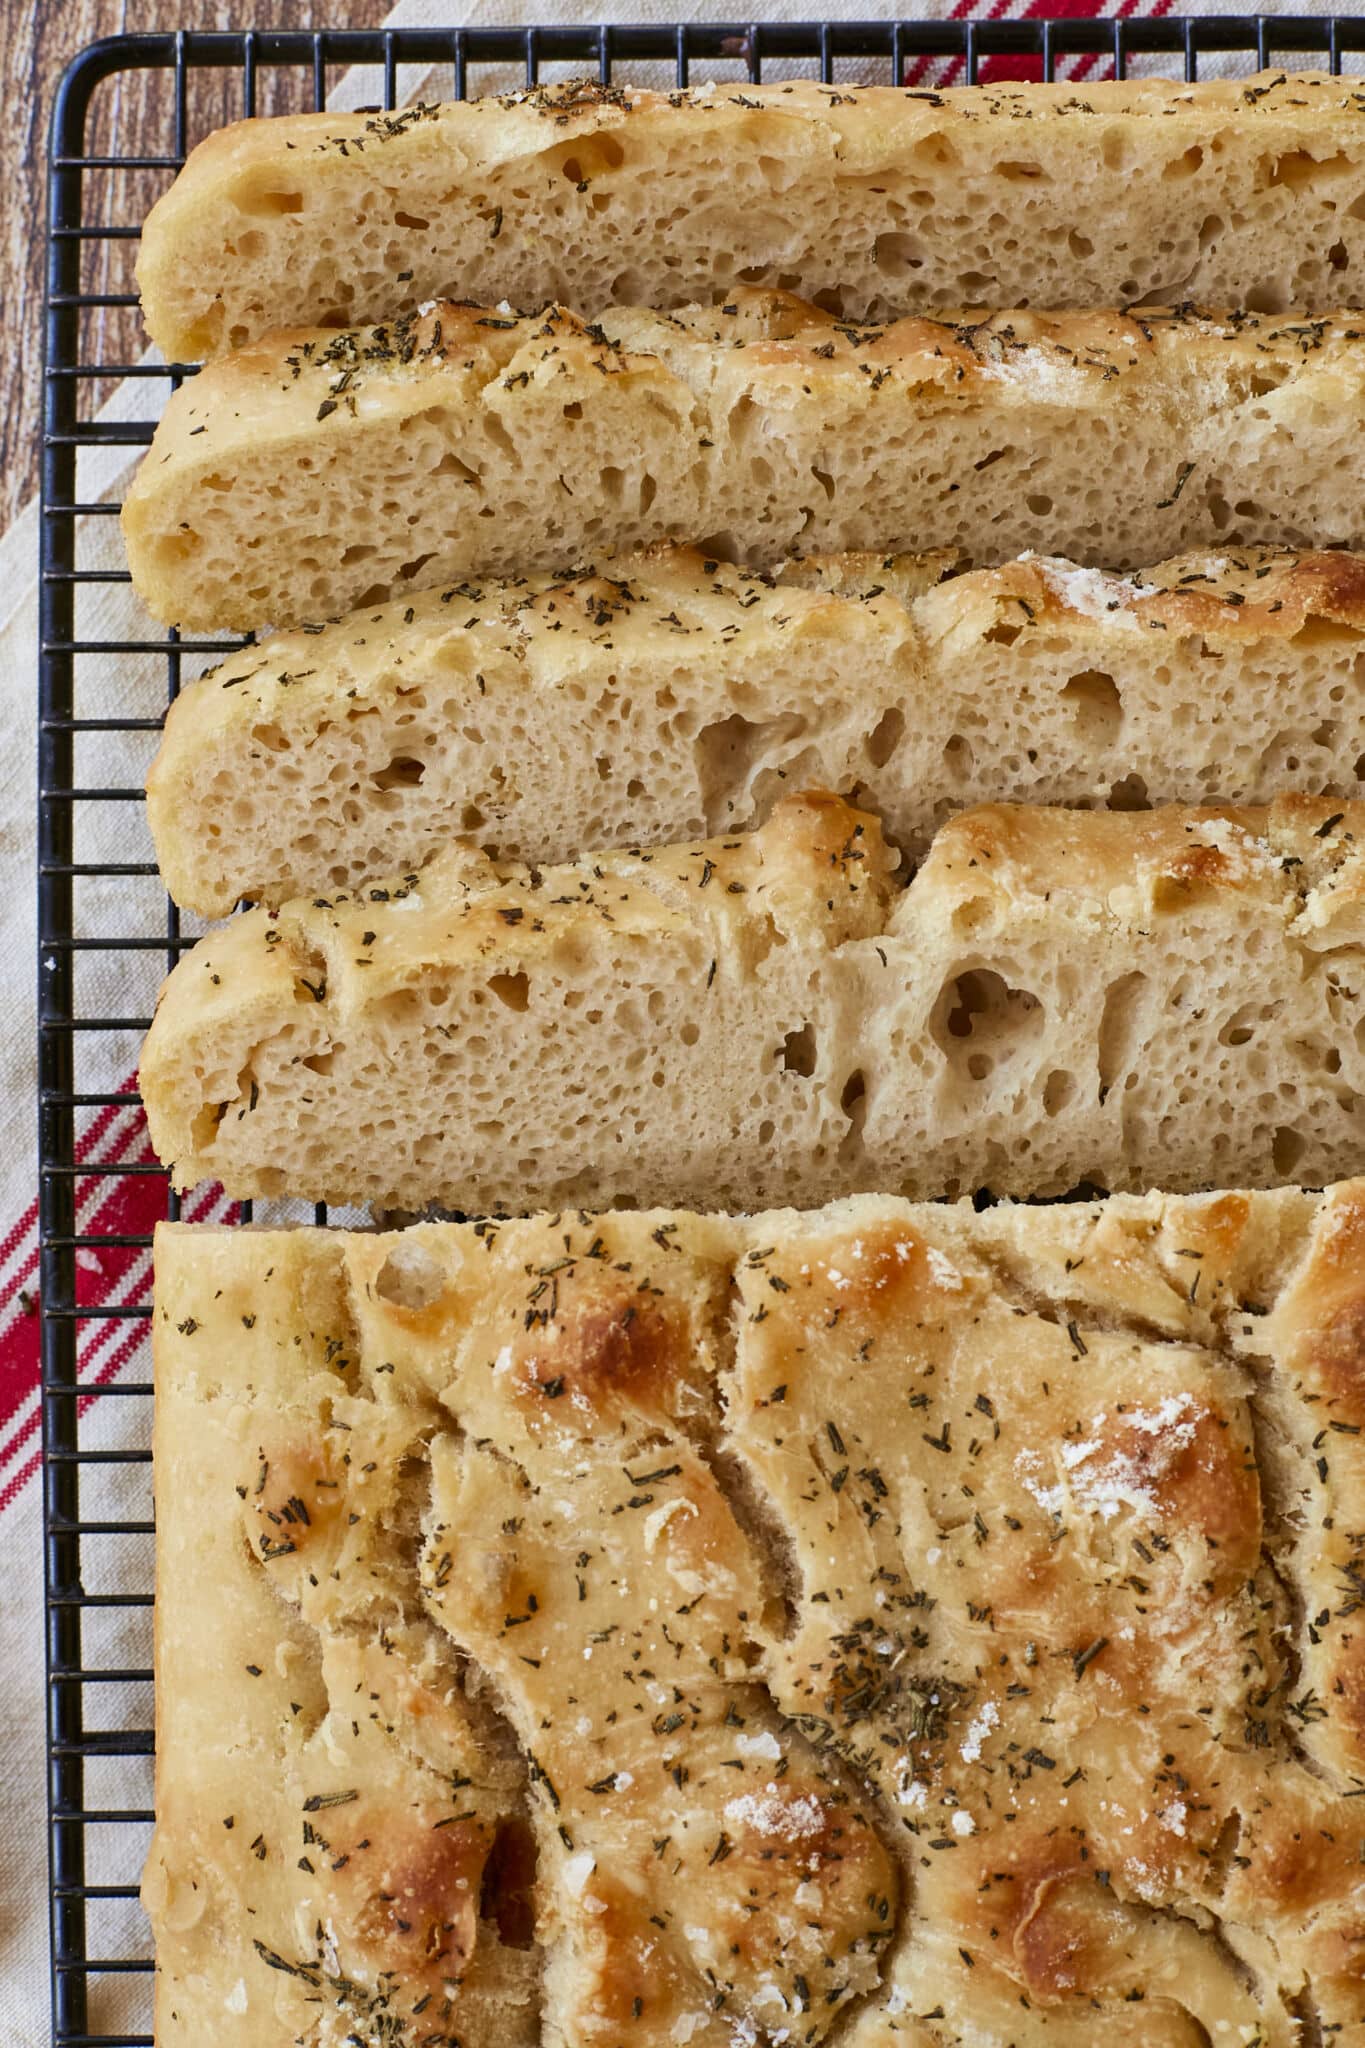 No-knead focaccia is sliced and cooling on the black wire rack. The close-up shot shows it bubbly crumb and golden, crispy exterior loaded with flaky sea salt, Roasted Garlic and Rosemary. 